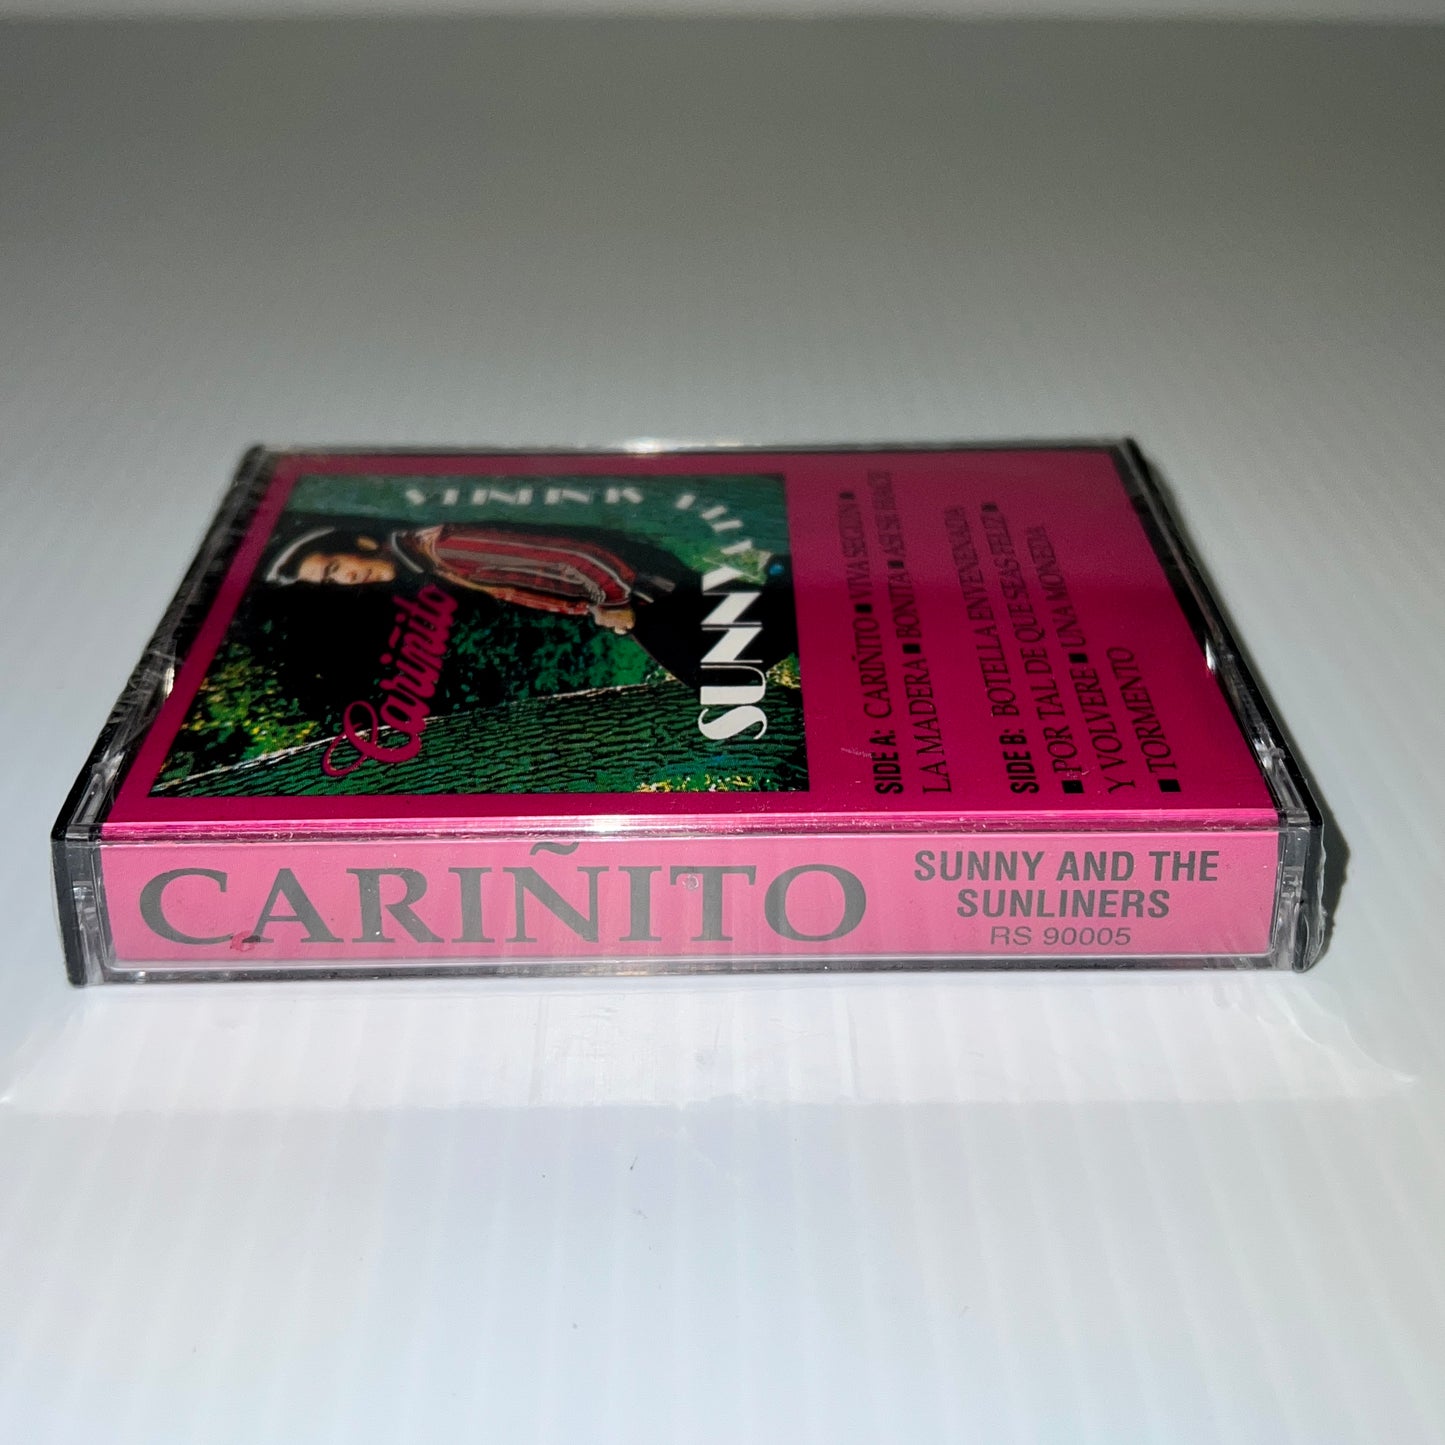 Sunny & The Sunliners - Cariñito (Cassette)